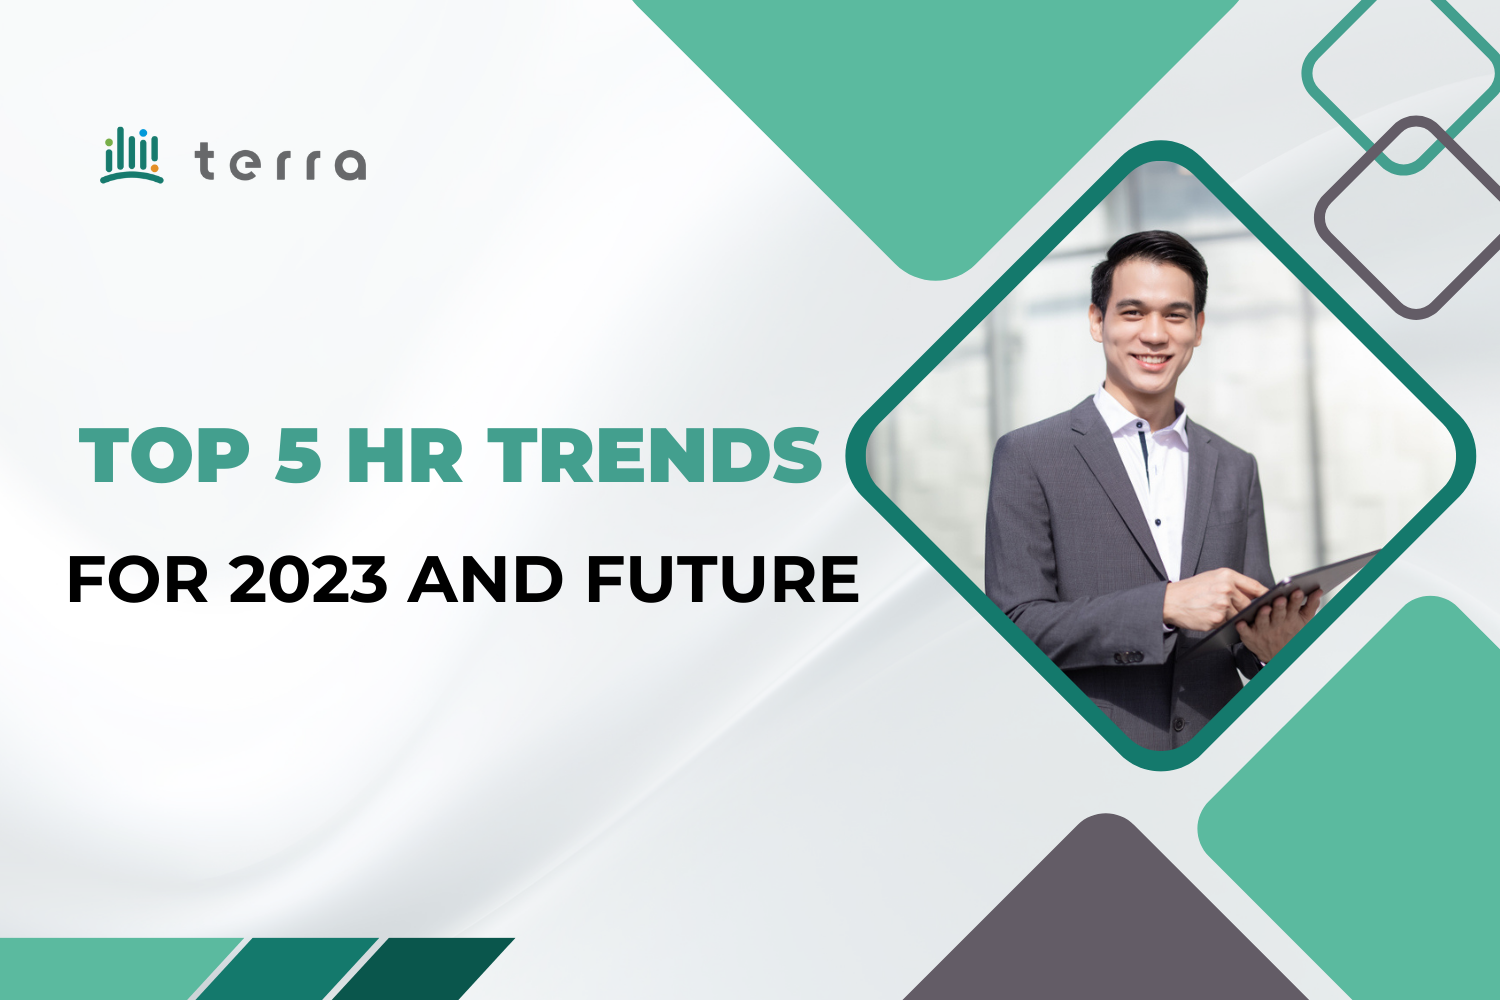 Top 5 HR trends for 2023 and future